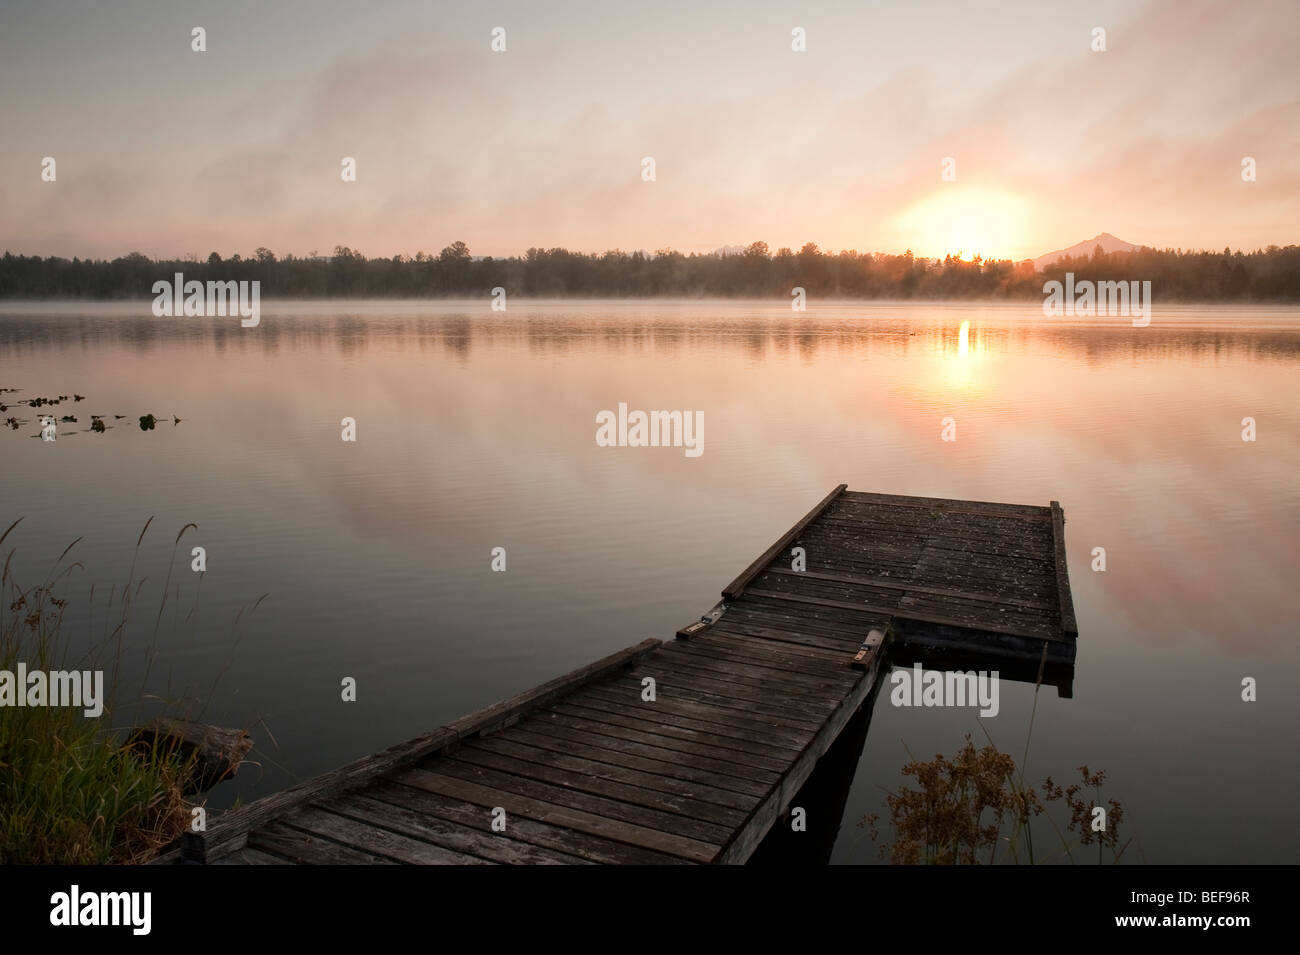 Sunrise at Lake Cassidy in fog with Mount Pilchuck and dock in ...